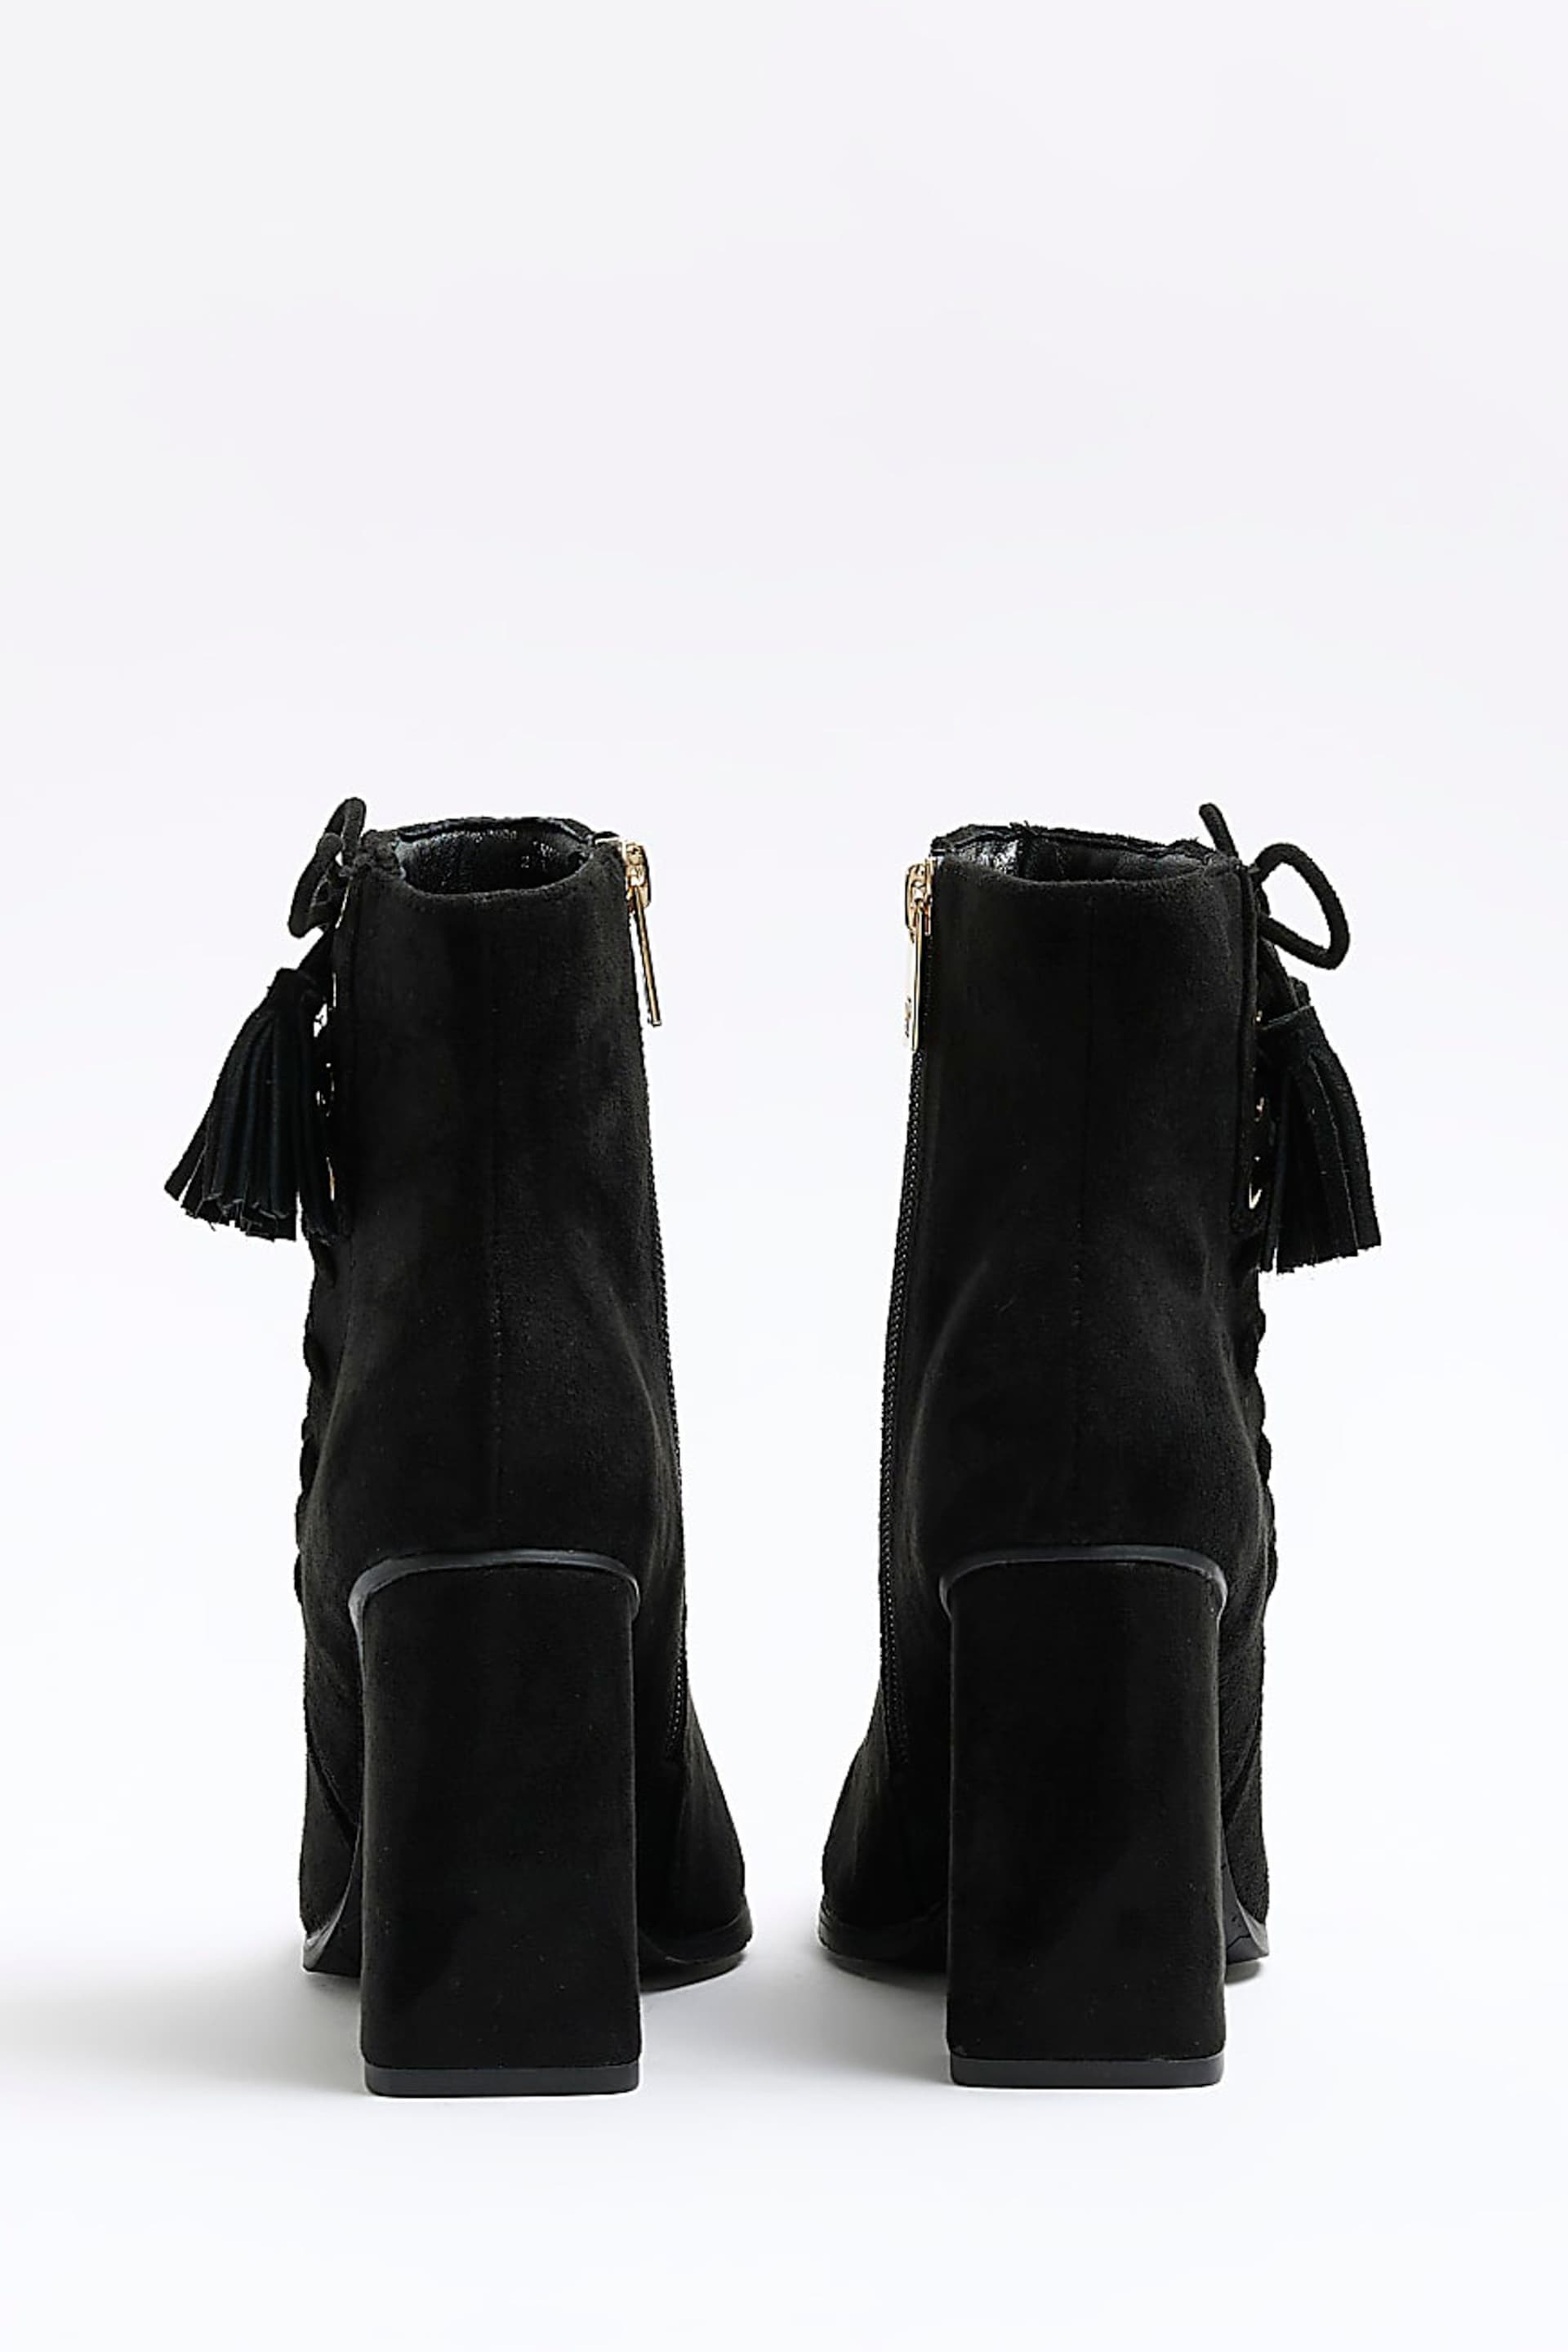 River Island Black Lace Up Corset Boots - Image 3 of 6